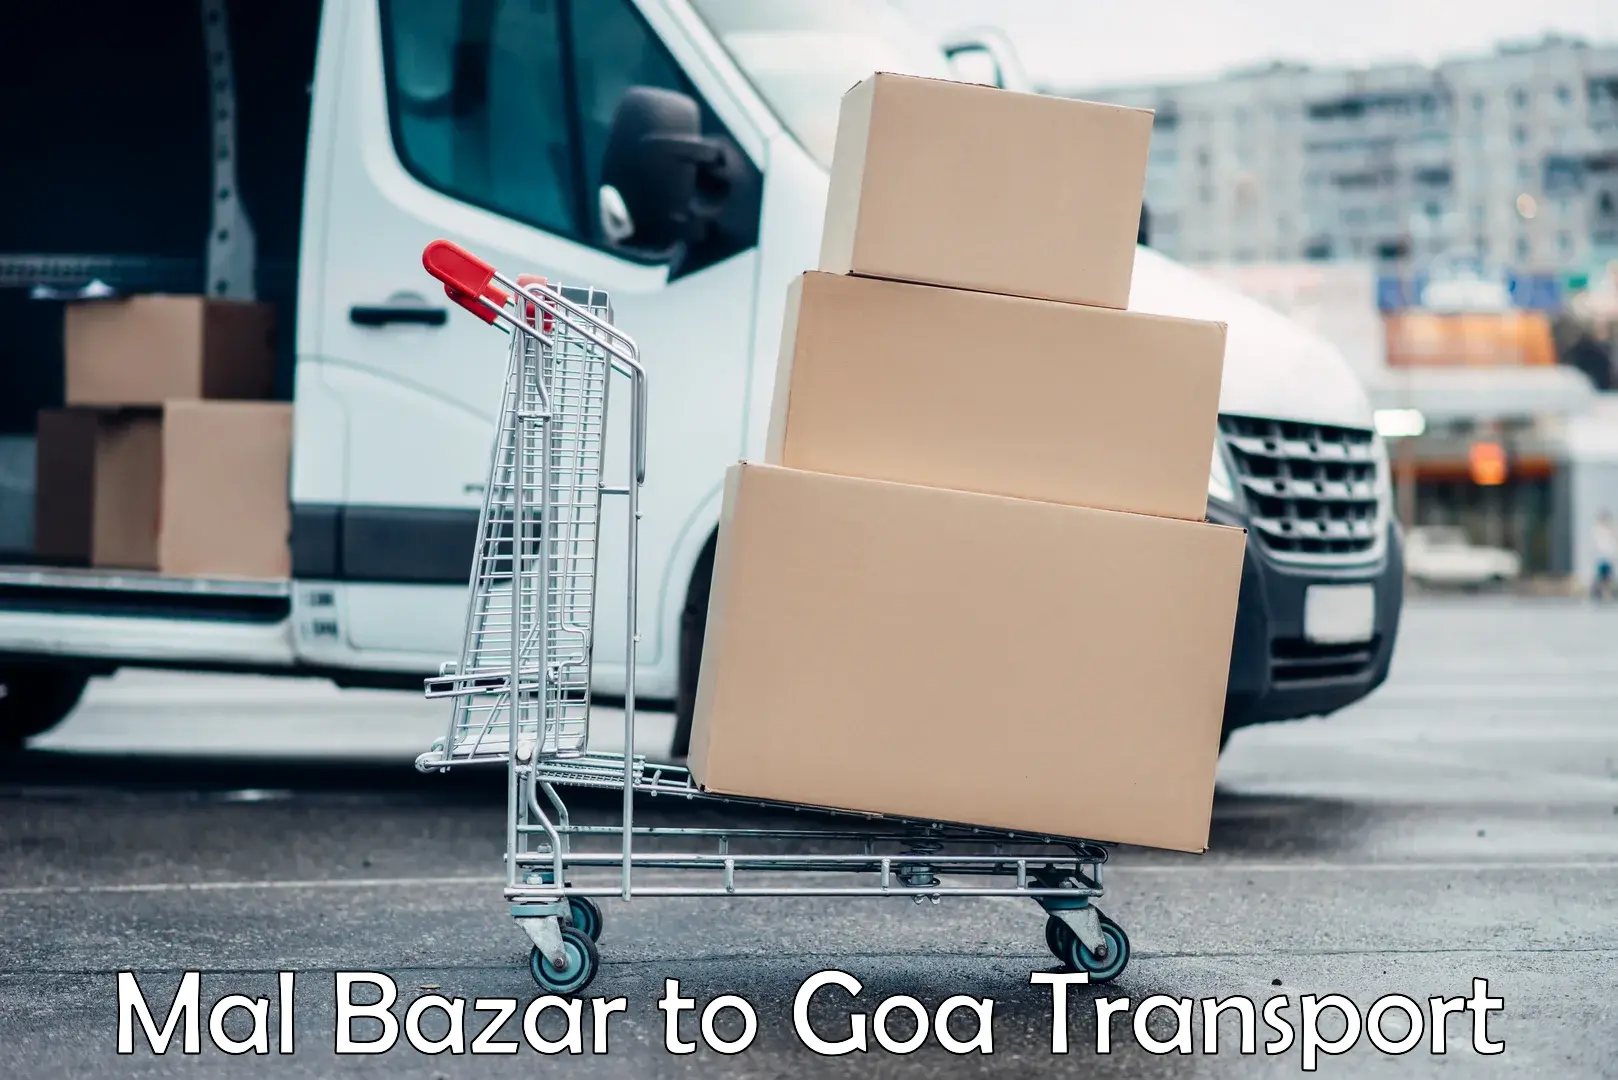 Vehicle transport services Mal Bazar to Goa